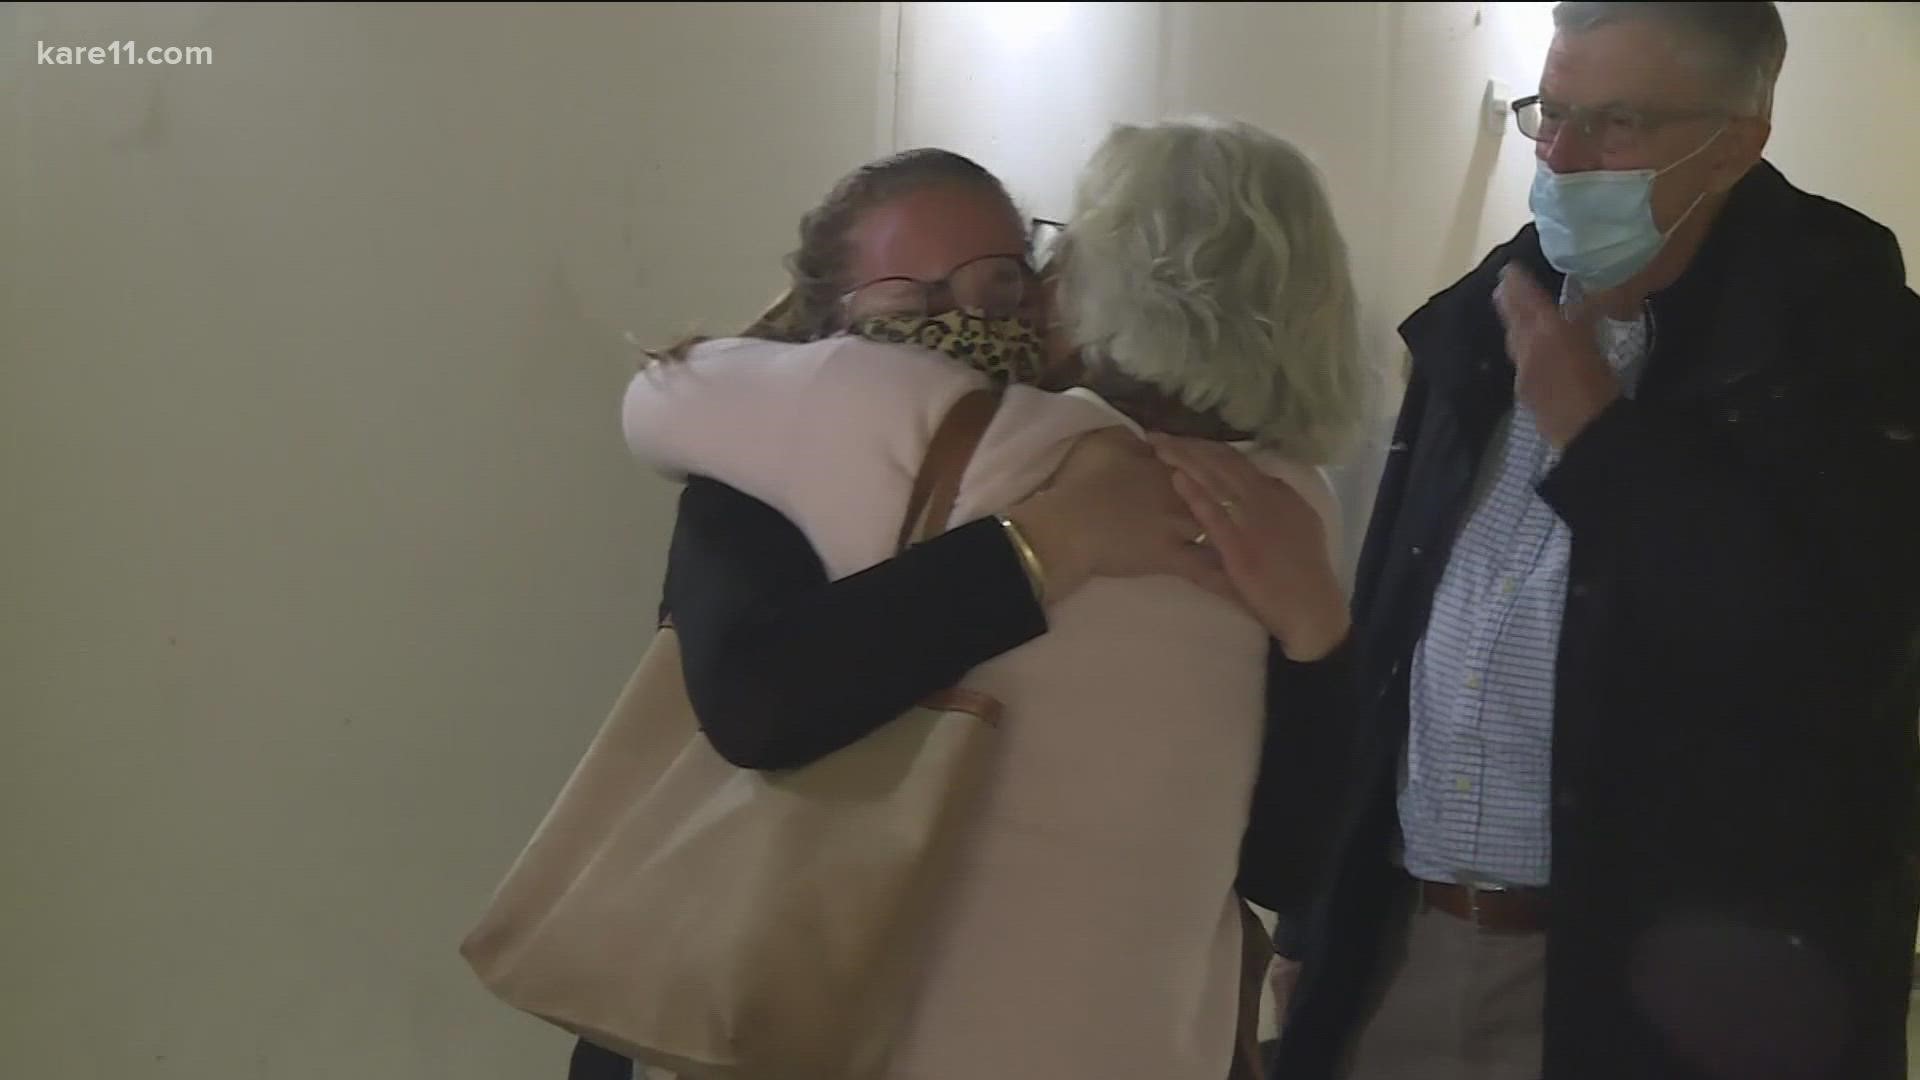 Loved ones were reunited at Minneapolis-St. Paul International Airport Monday after the U.S. officially lifted travel restrictions brought on by COVID-19.